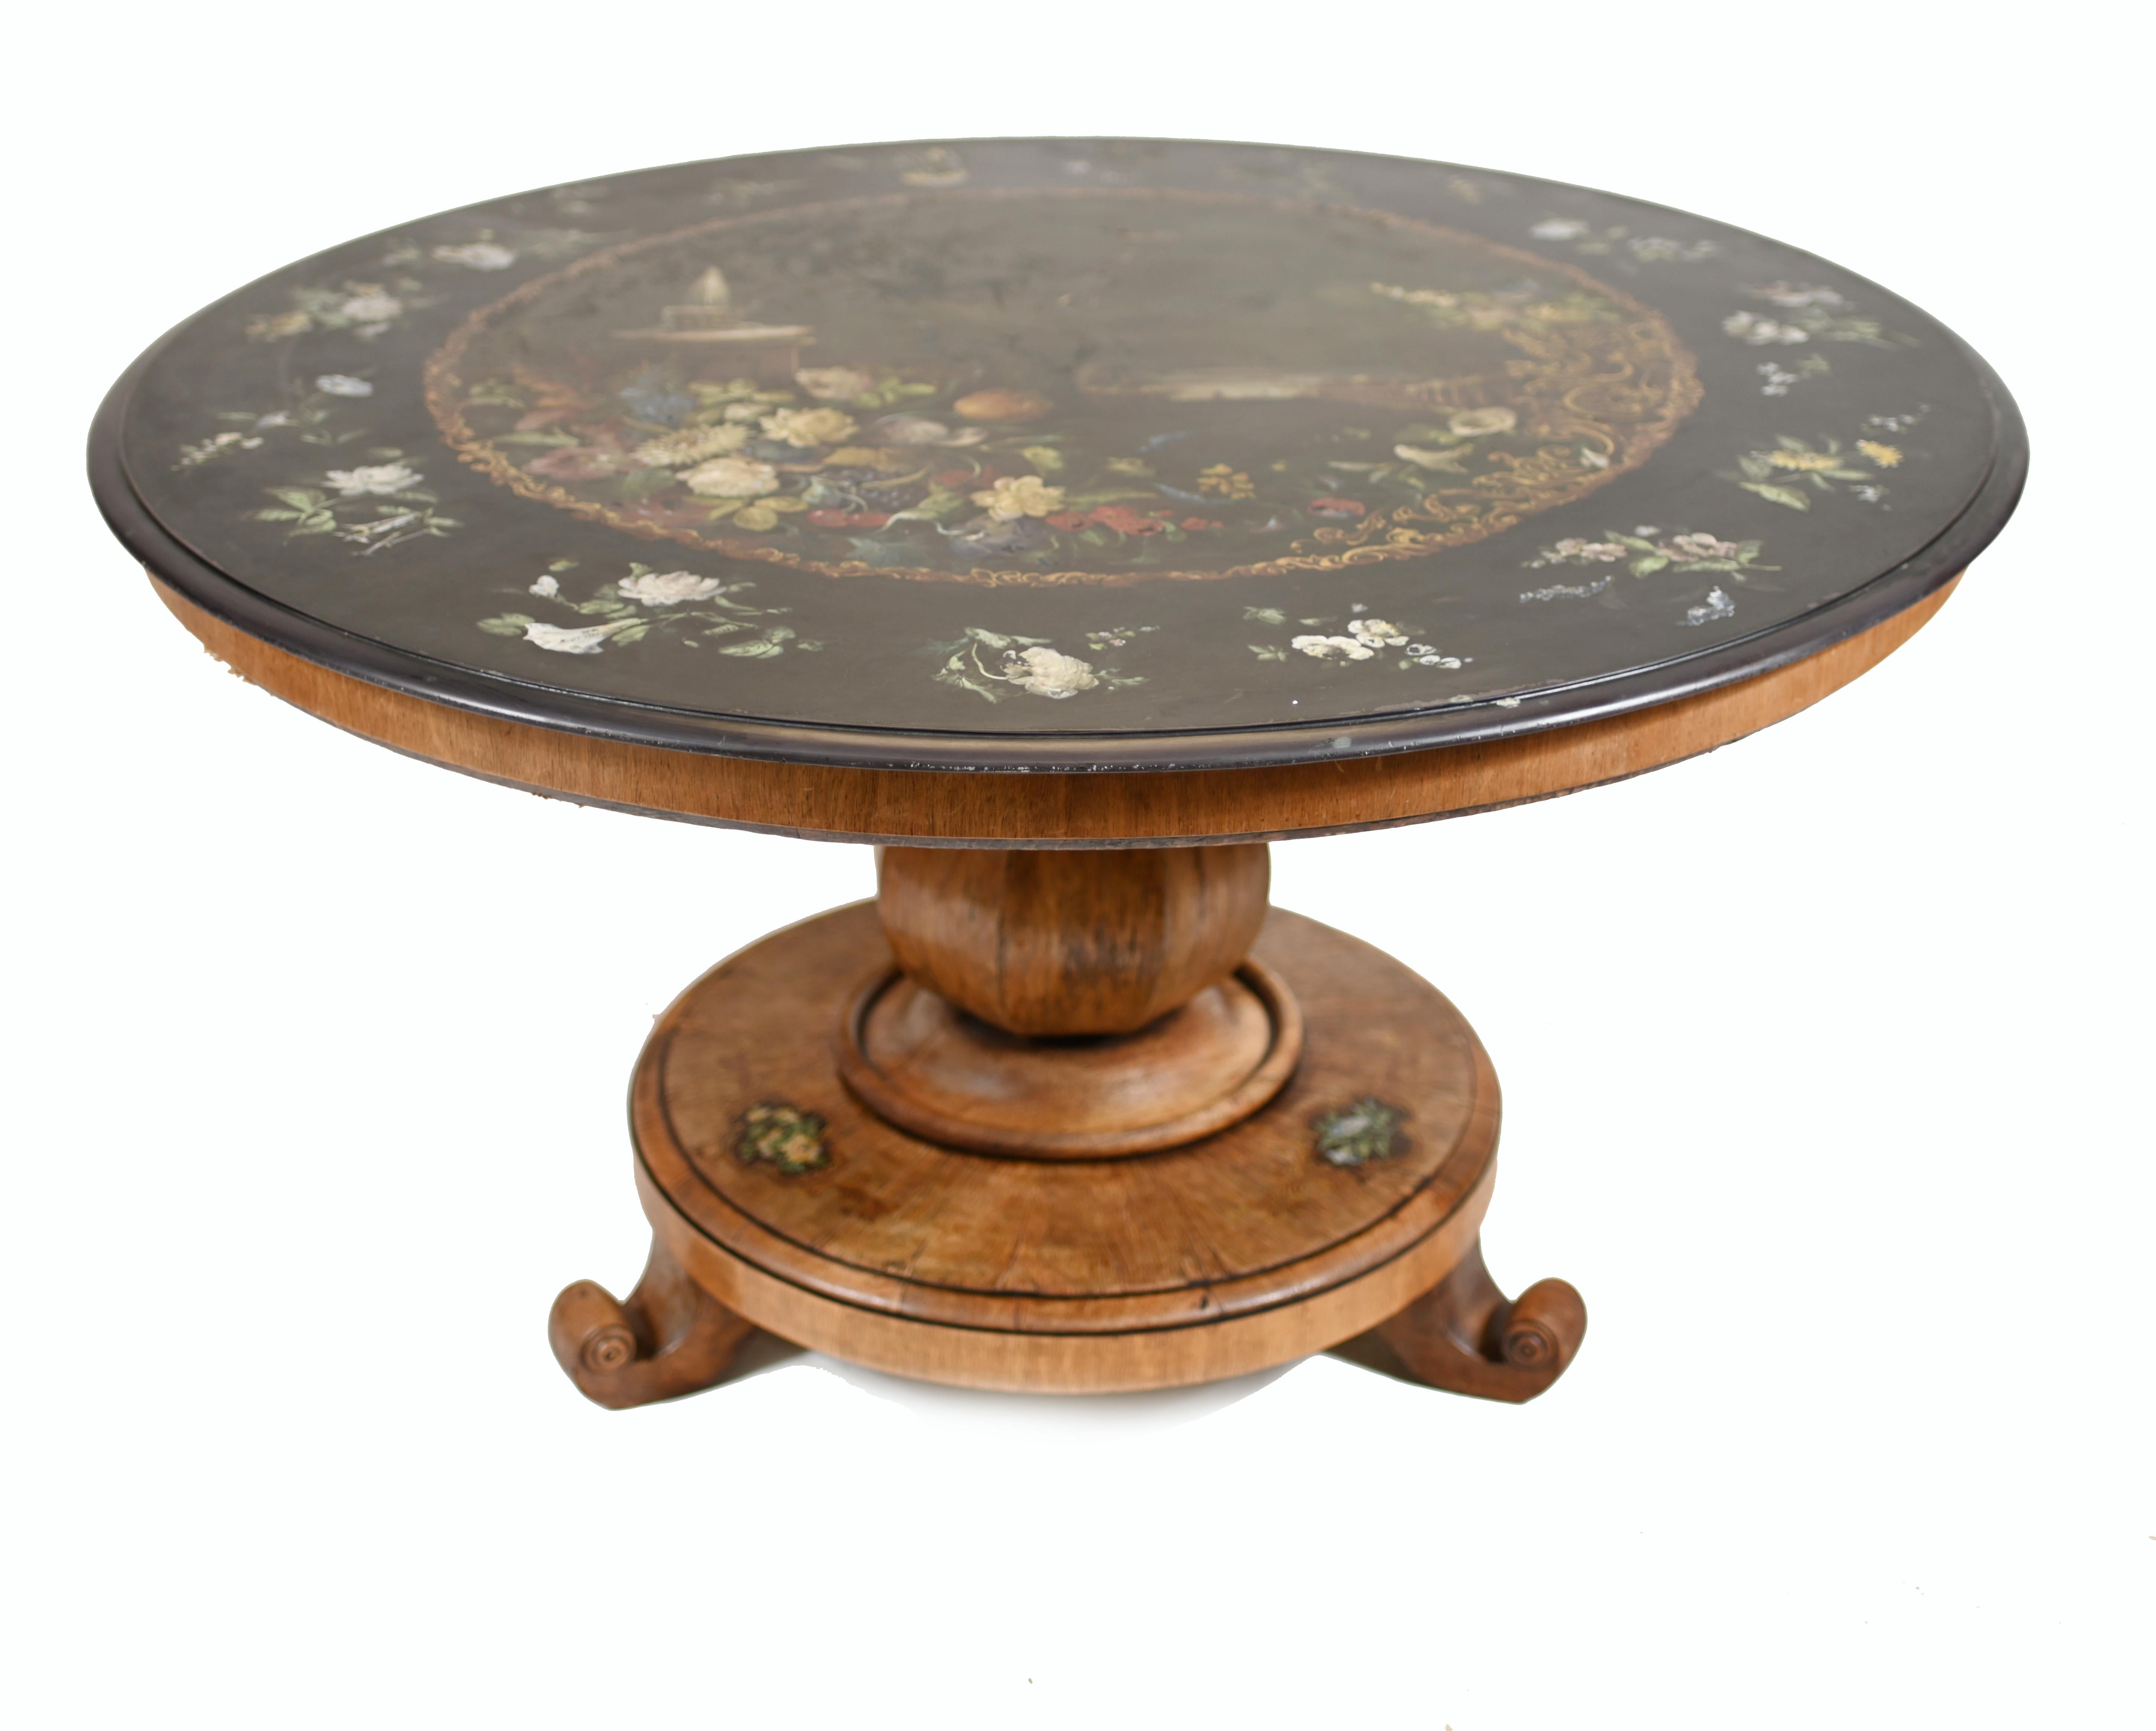 Absolutely stunning antique centre table with painted slate top.
This piece of antique folk art is Welsh in origin.
It would have been made in the Pontypool region which was famous for this type of piece.
The black slate top has been hand painted